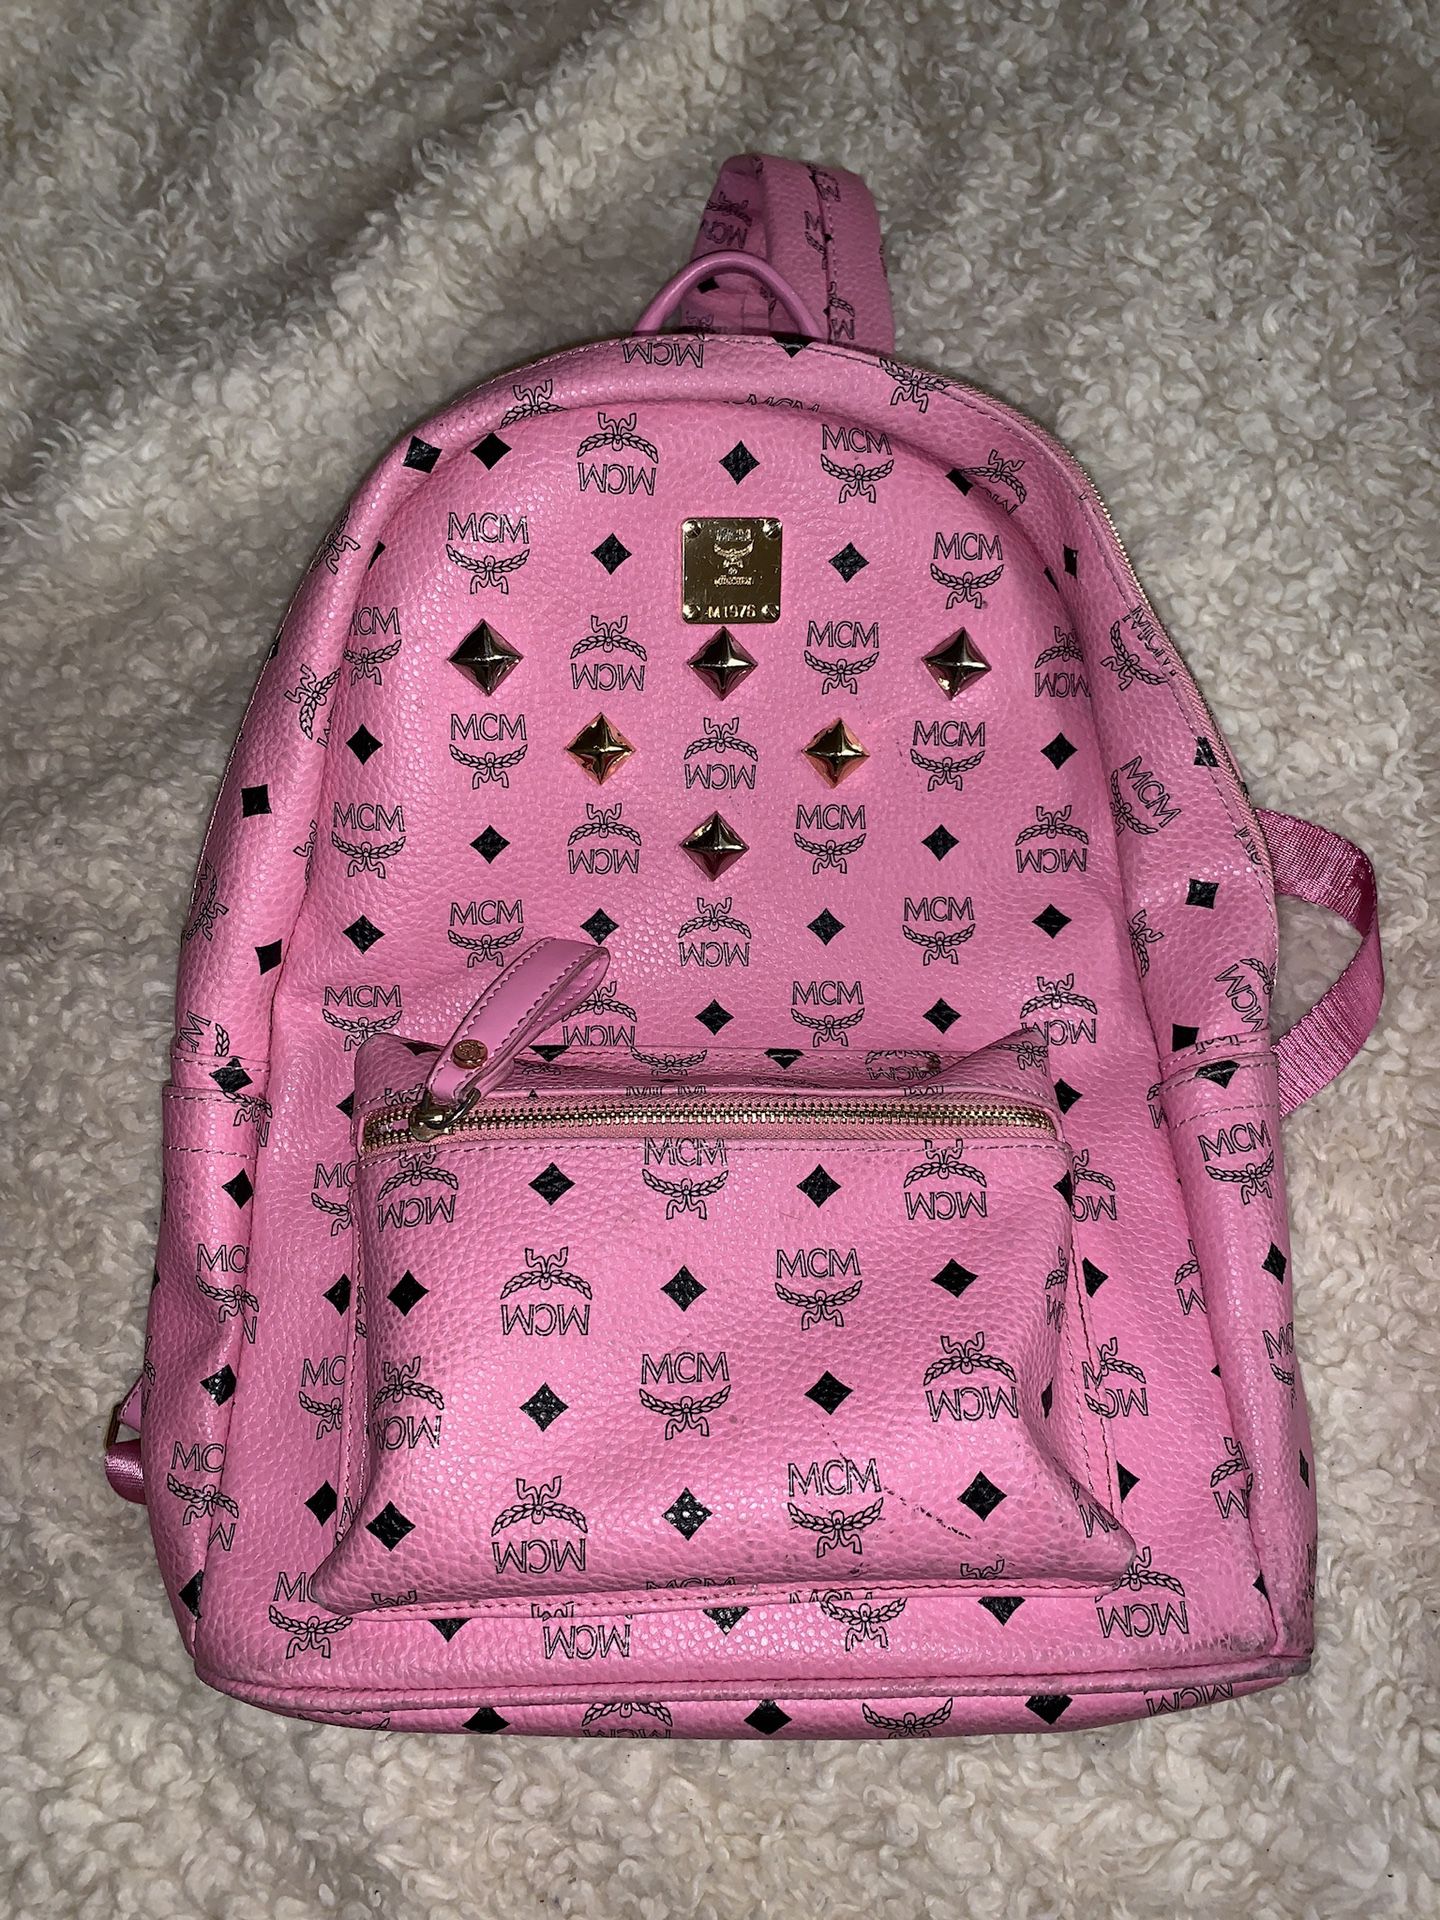 PINK MCM BACKPACK for Sale in Hayward, CA - OfferUp